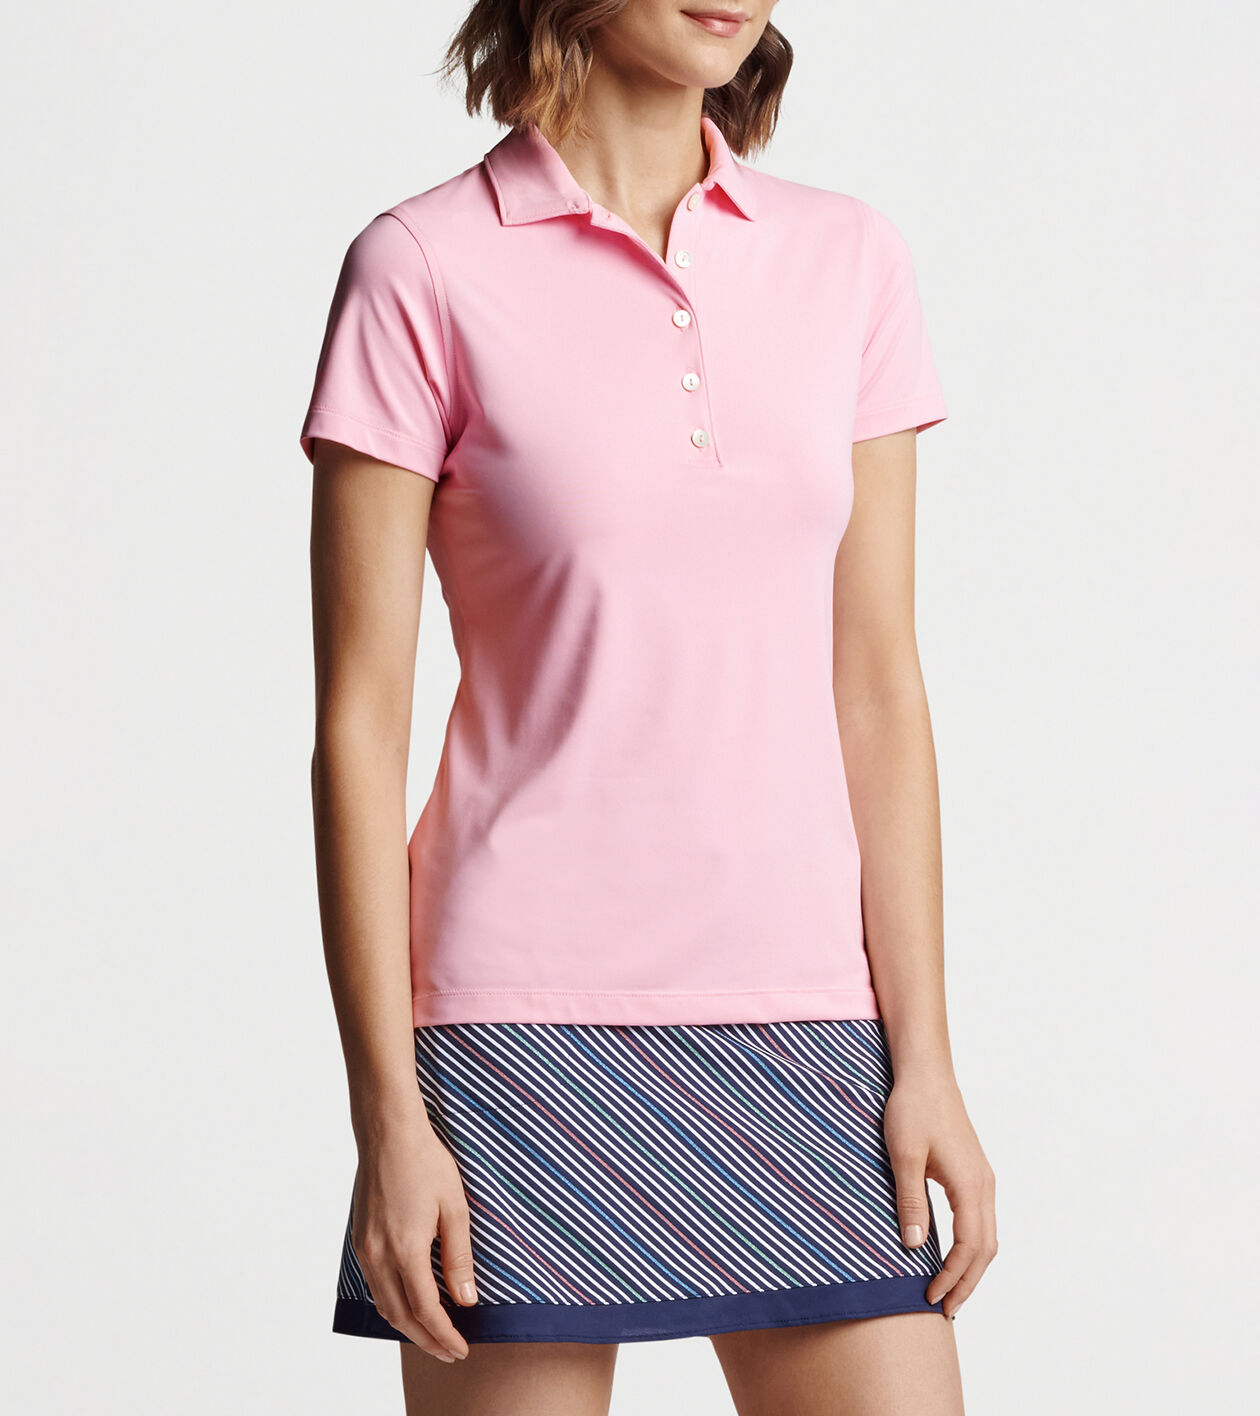 Perfect Fit Performance Polo | Women's Polo Shirts | Peter Millar